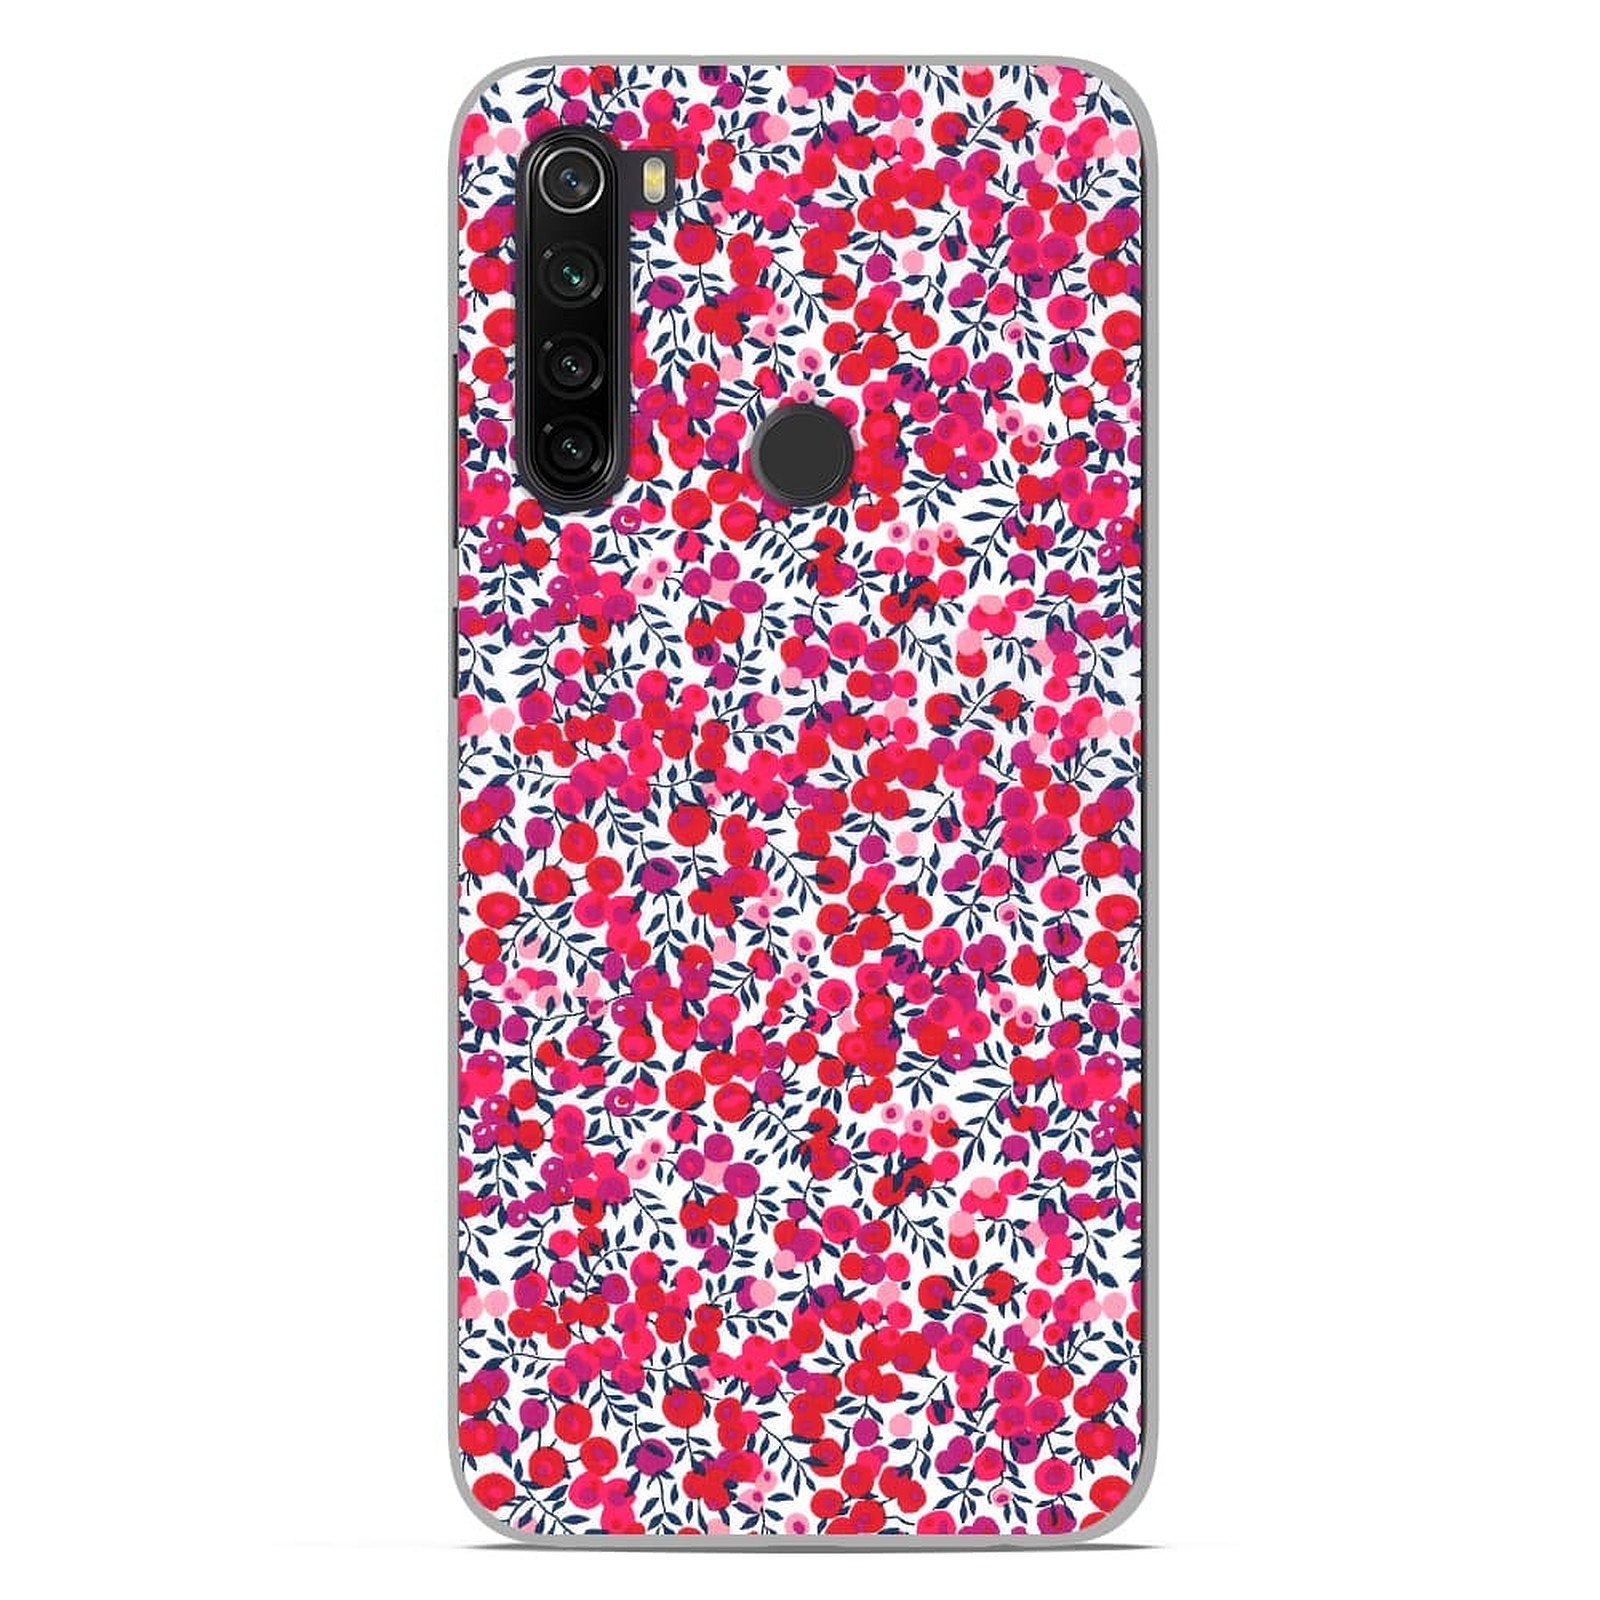 1001 Coques Coque silicone gel Xiaomi Redmi Note 8T motif Liberty Wiltshire Rouge - Coque telephone 1001Coques